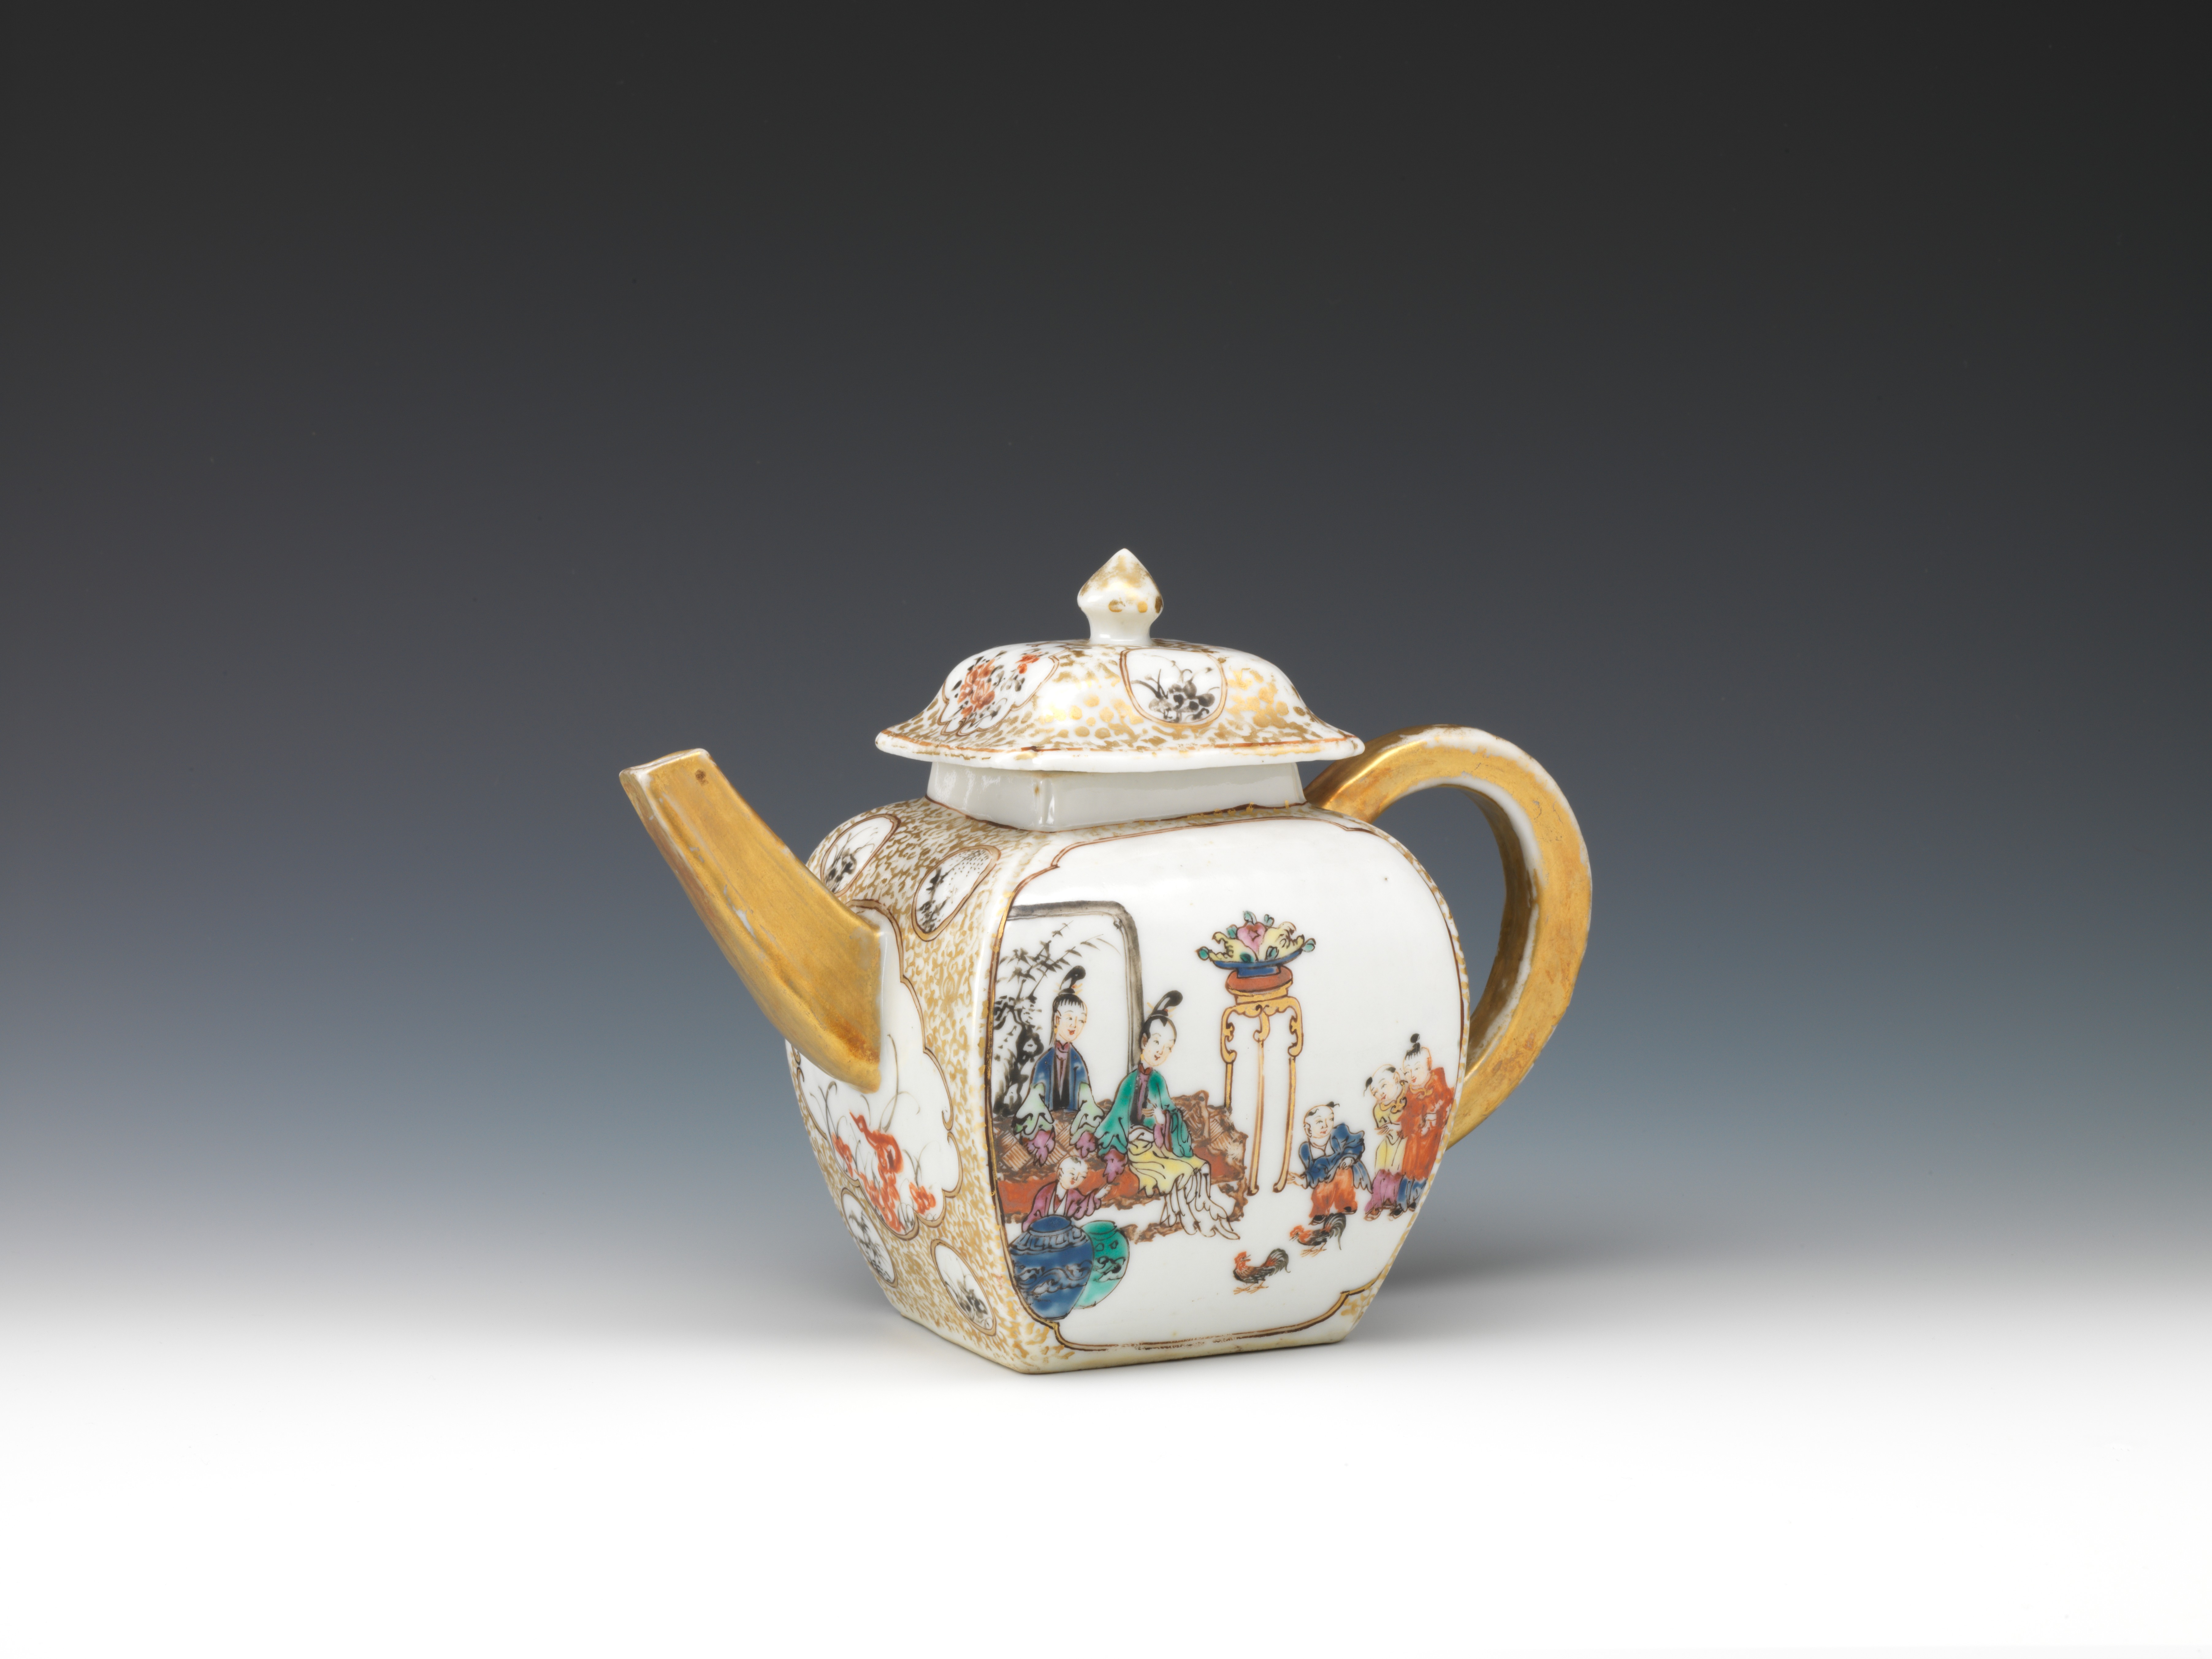 Teapot painted in famille-rose enamels with domestic scenes